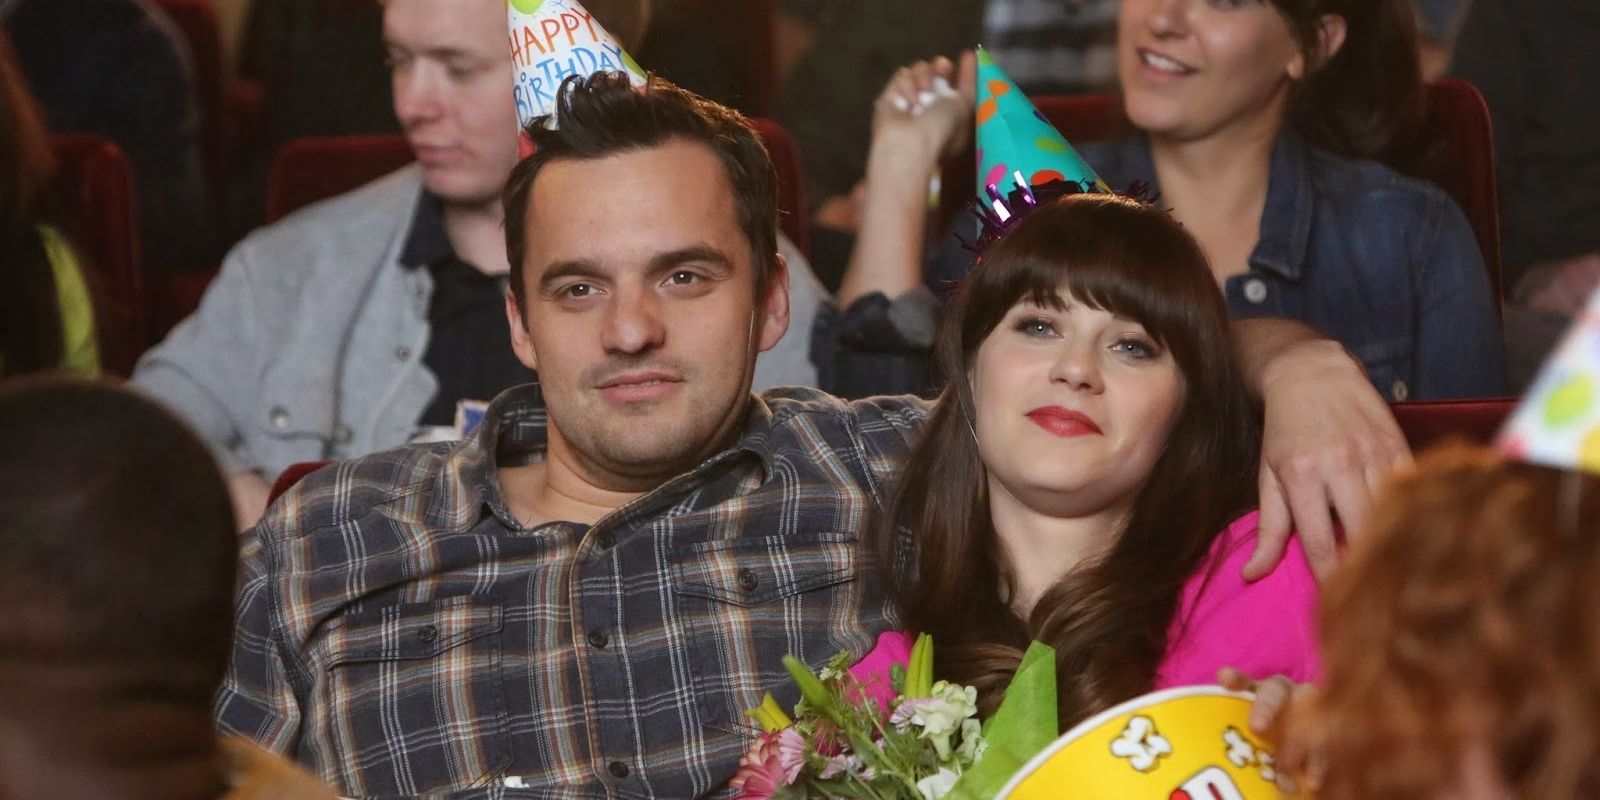 Nick with his arm around Jess in the theater in the New Girl episode Birthday